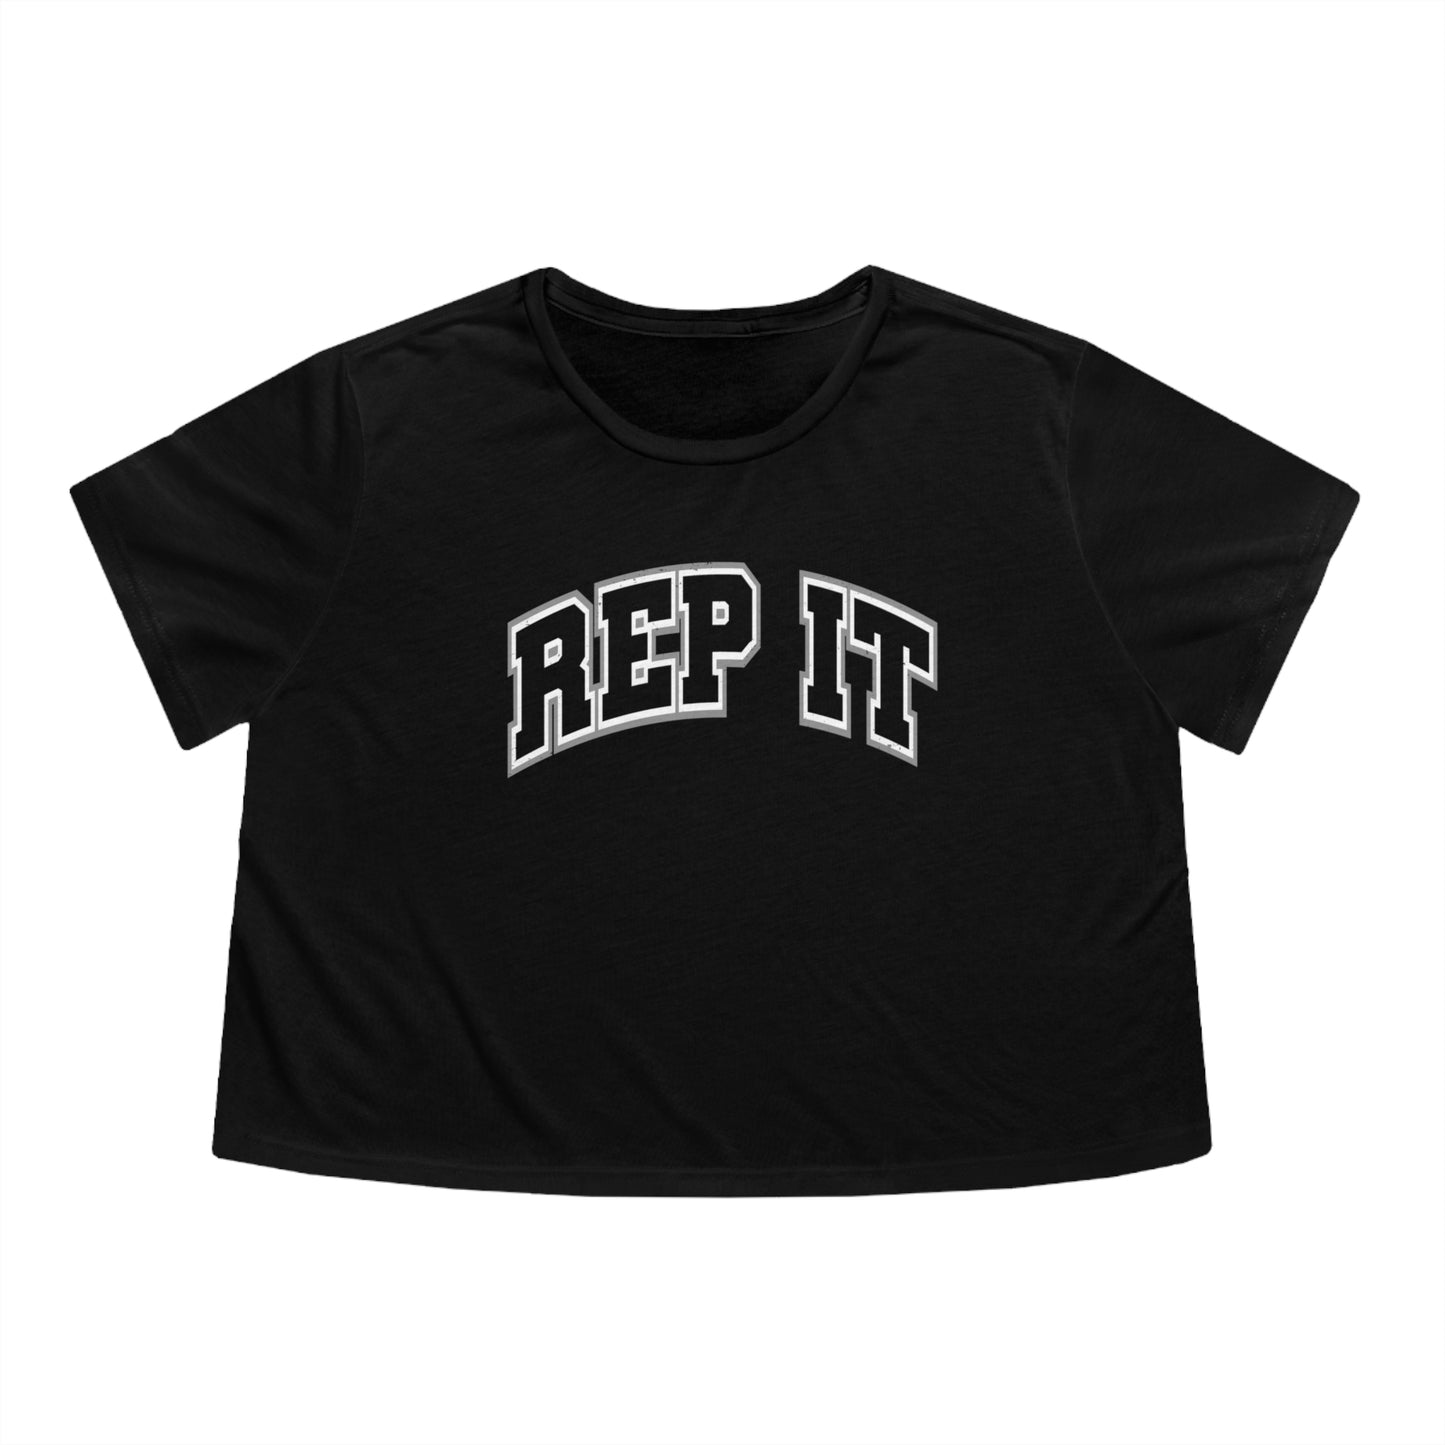 REP IT Arch Crop Tee